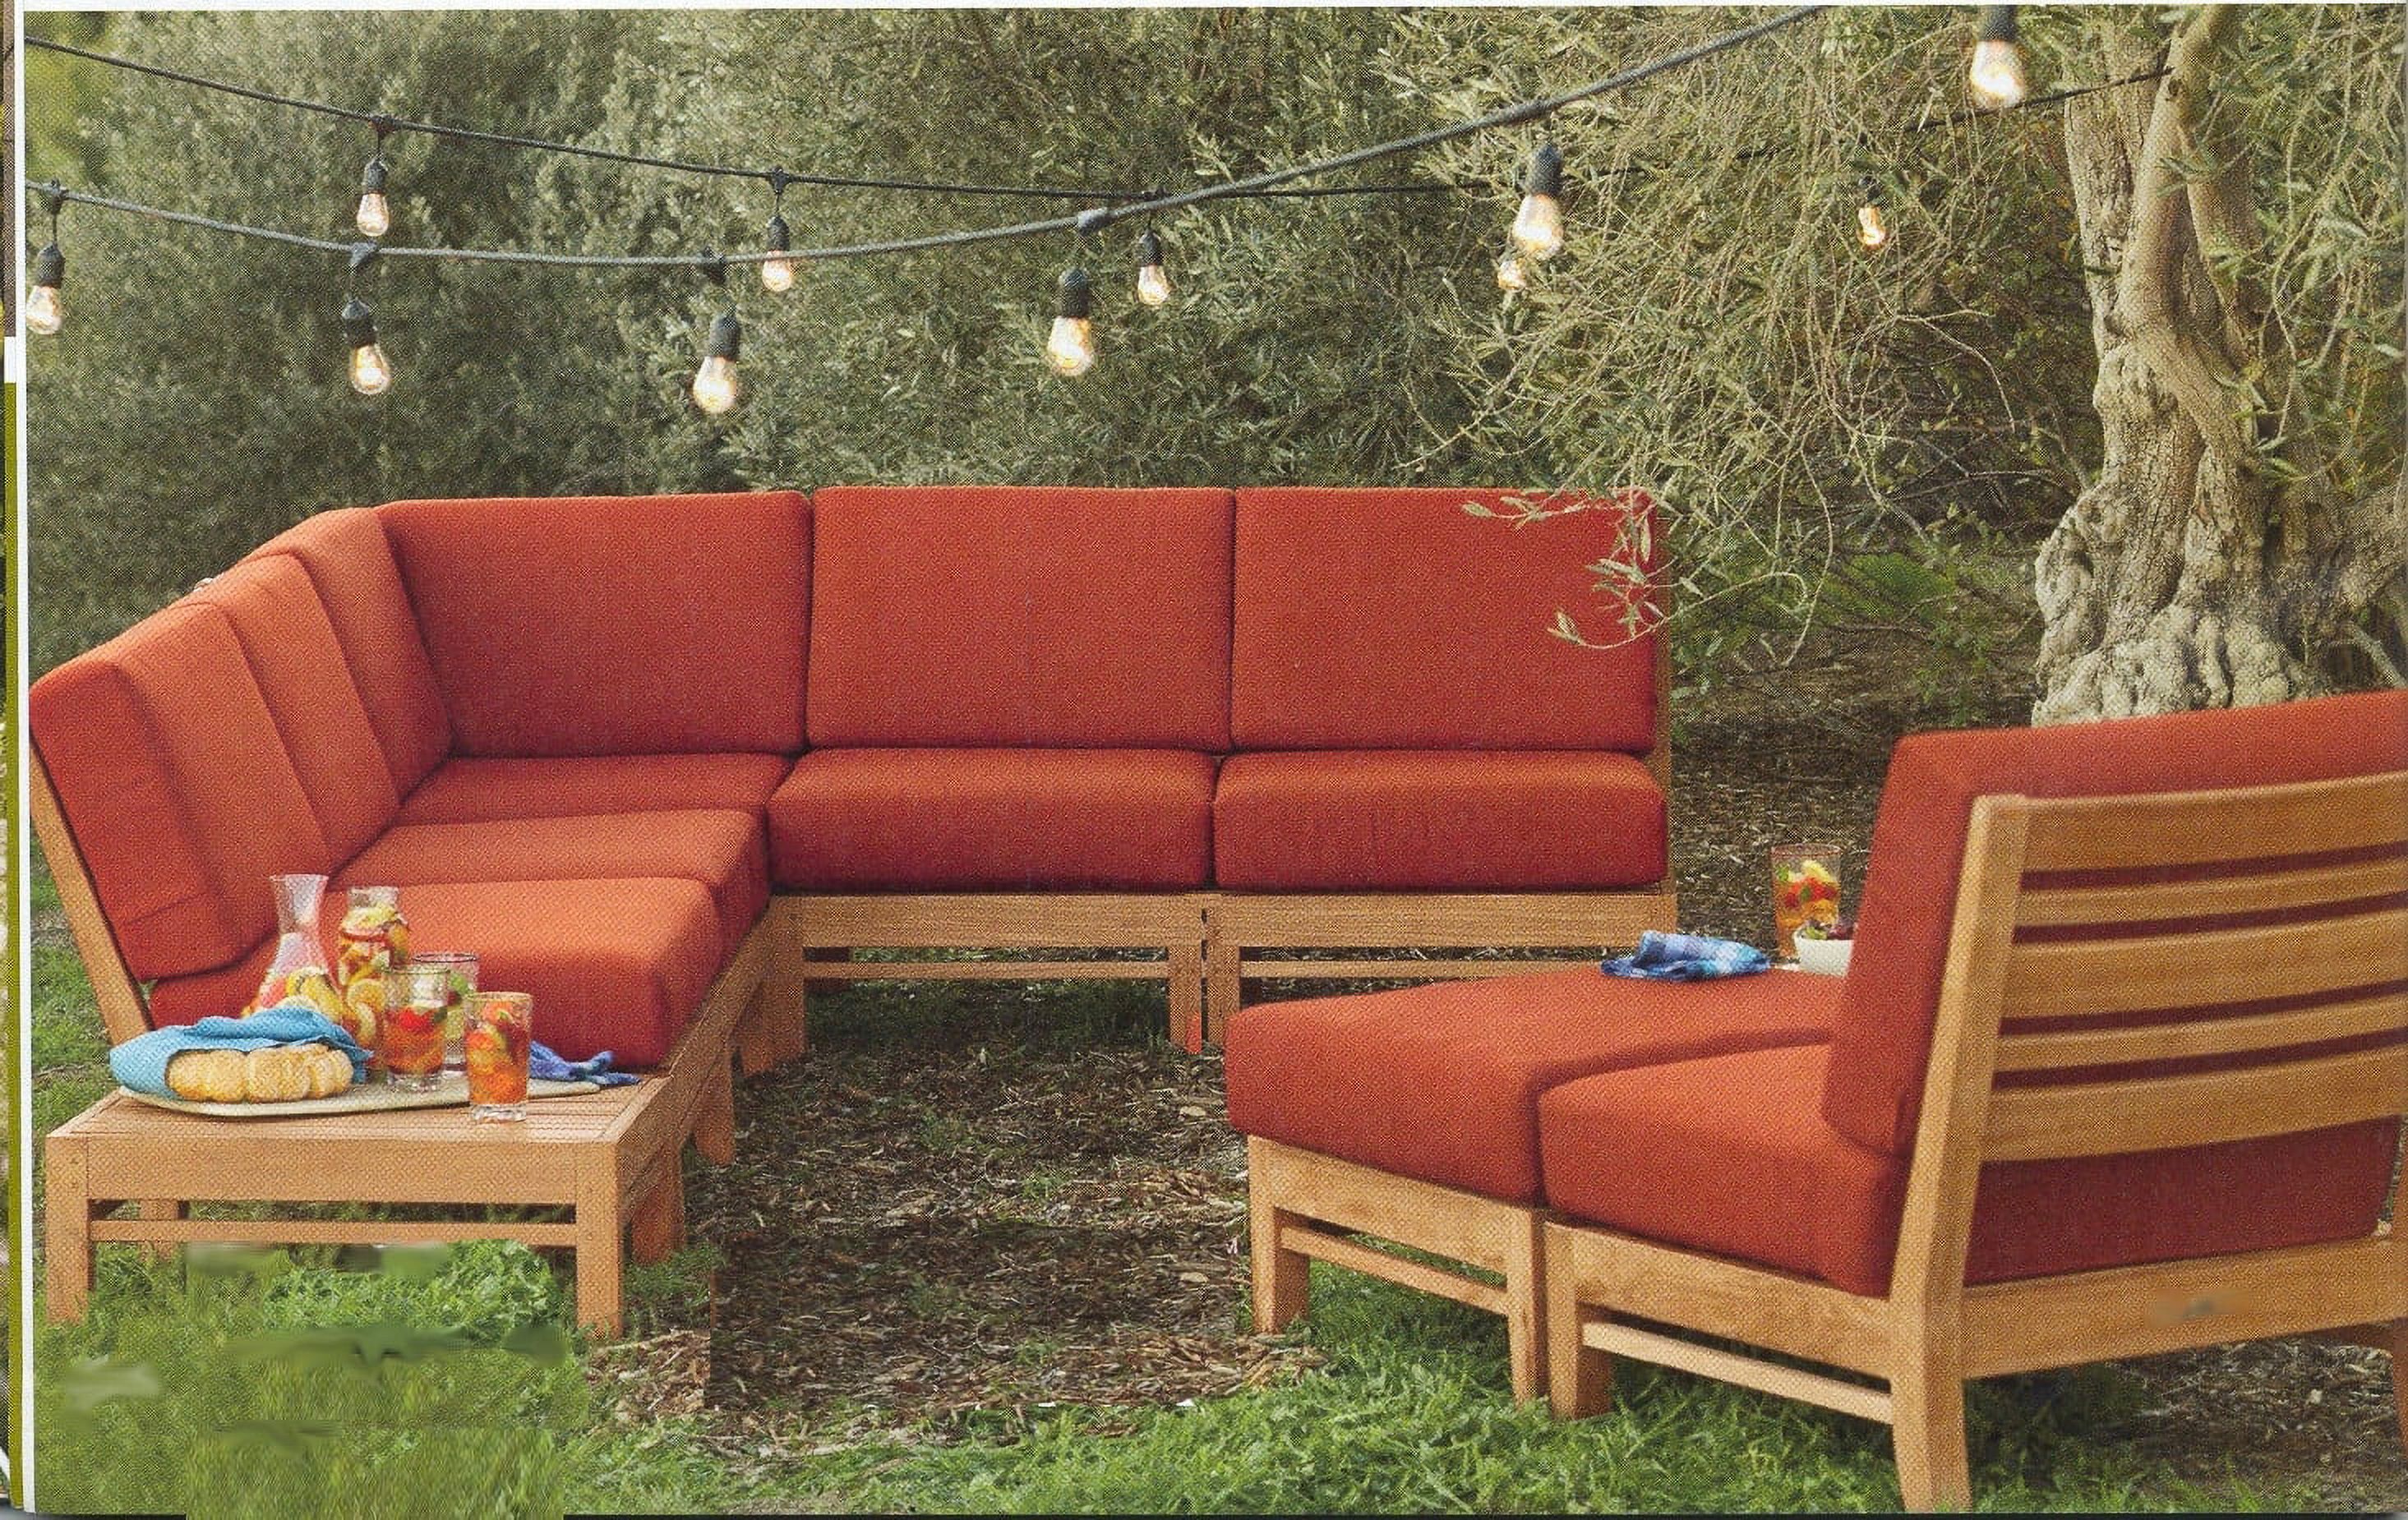 WholesaleTeak Outdoor Patio Grade-A Teak Wood 7 Piece Teak Sofa / Sectional Set - 4 Lounge Chair, 1 Corner Pc, 1 Ottoman & 1 Side Table -Furniture only -- Ramled collection #WMSSRM4 - image 5 of 6